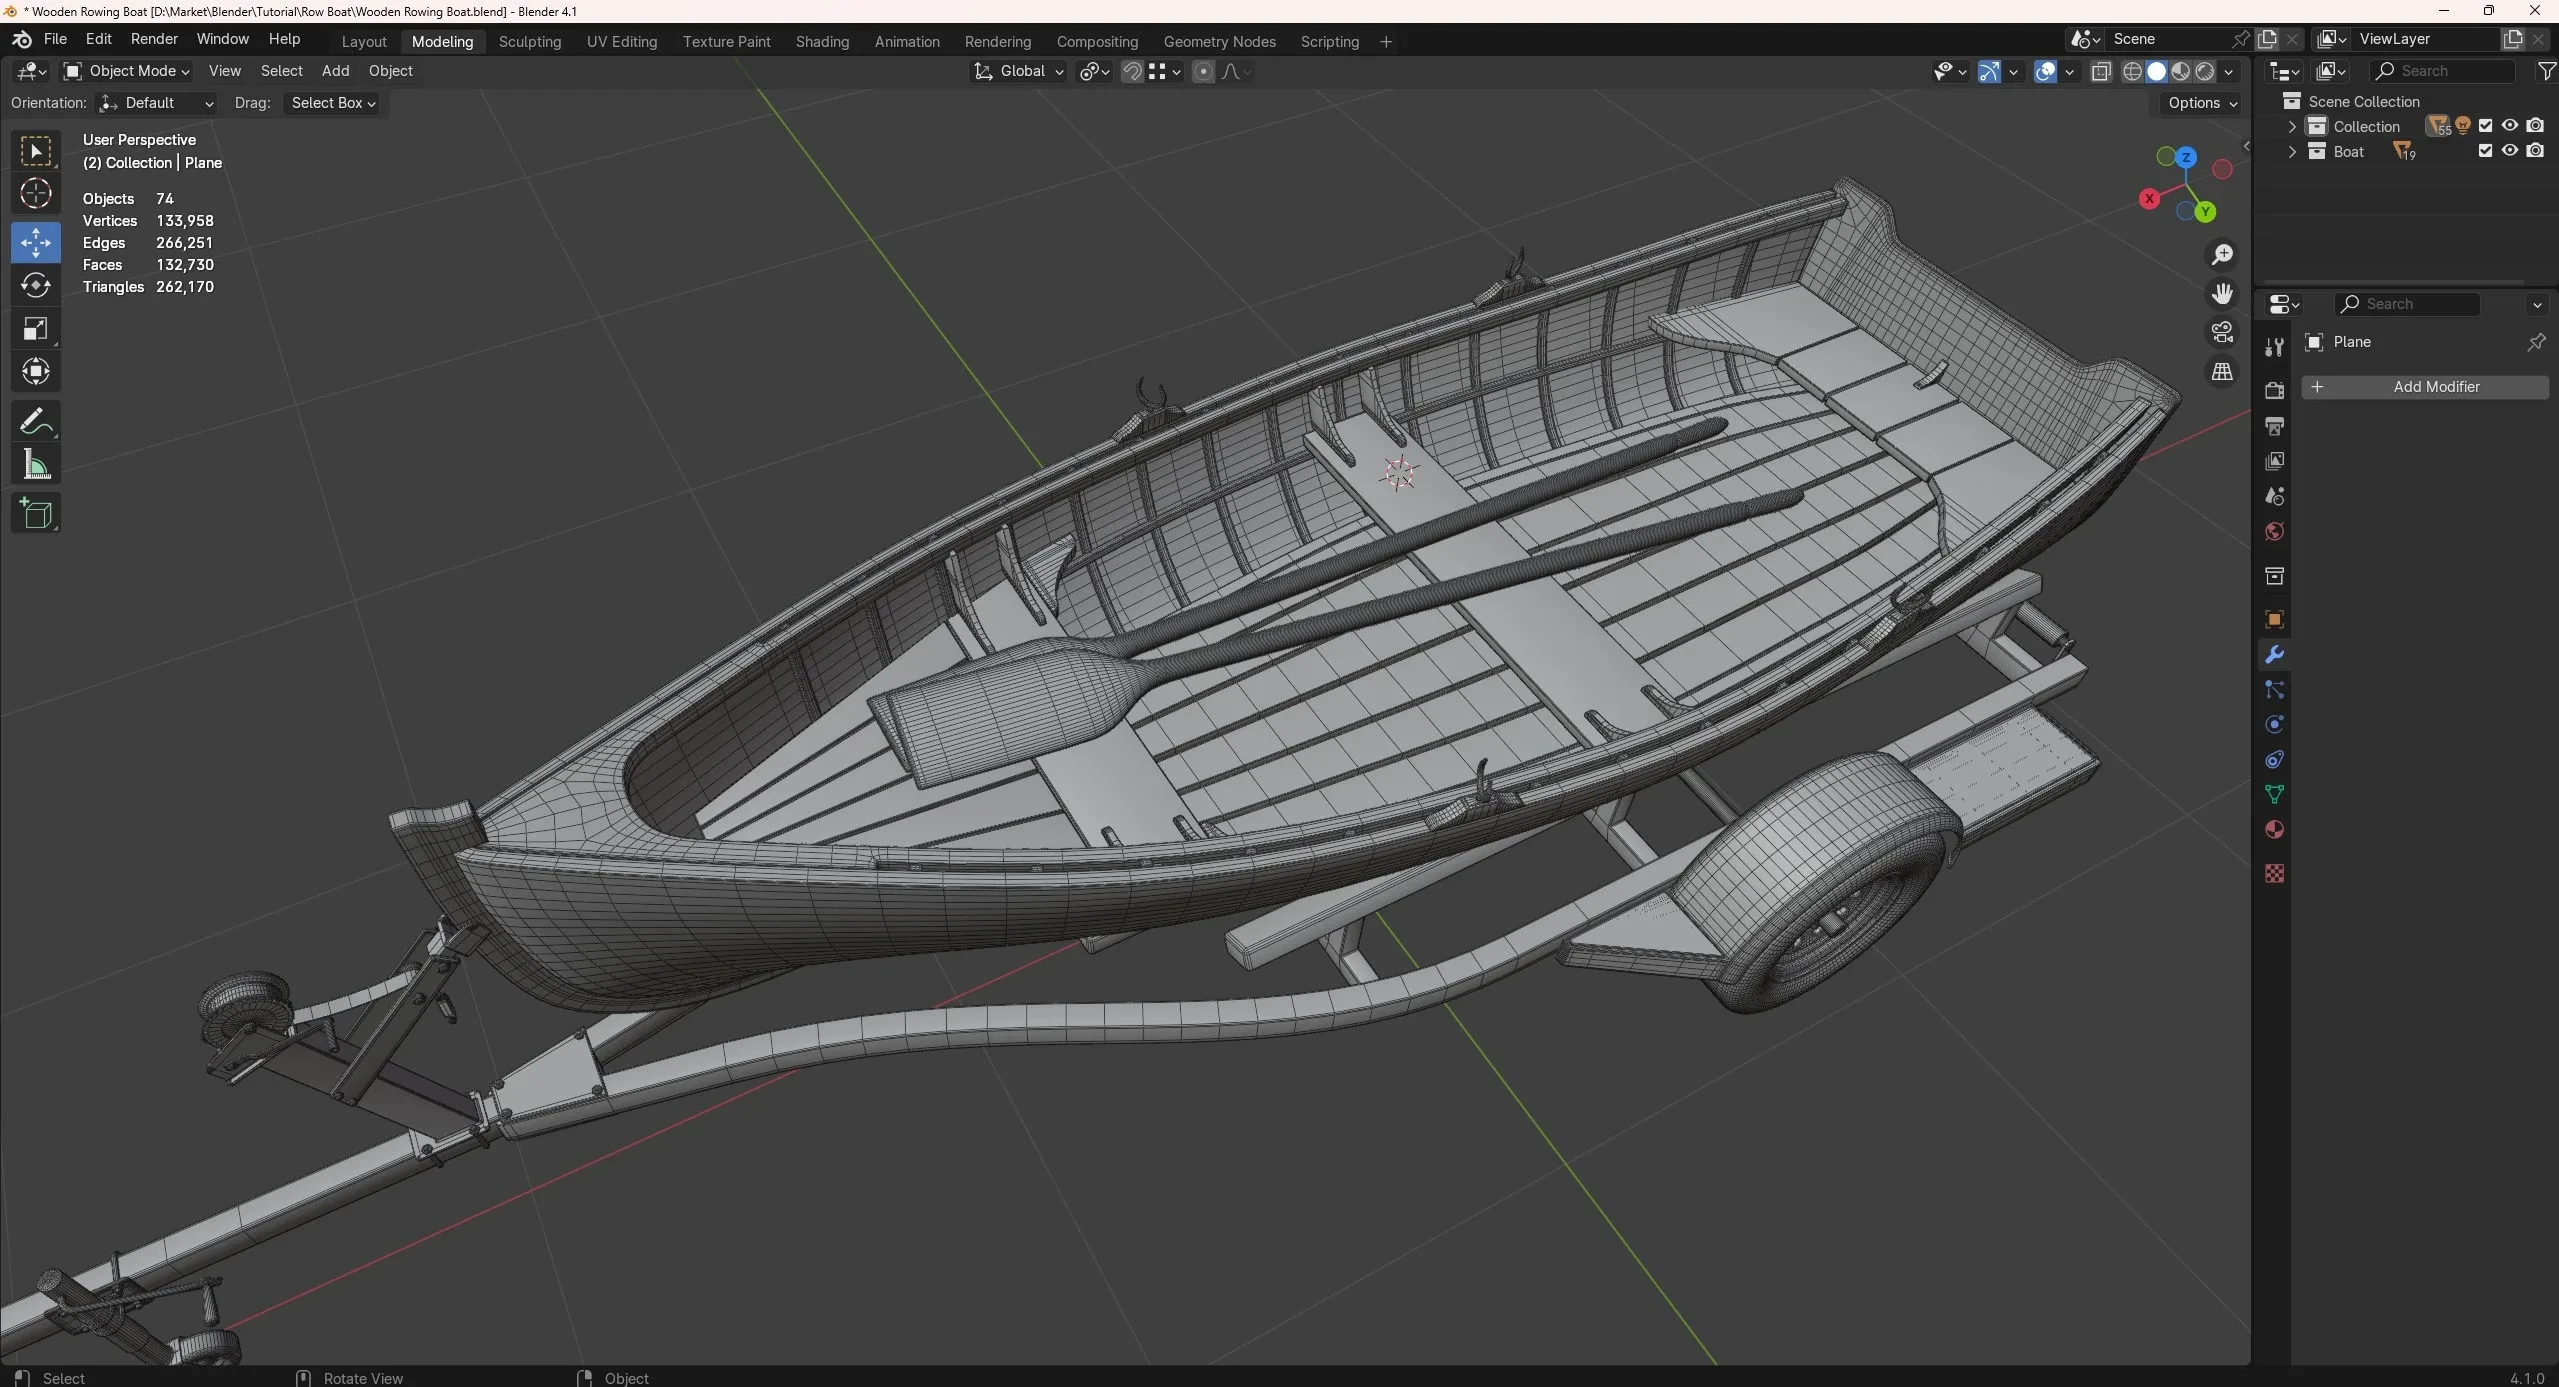 Master Creating Rowing Boat plus Trailer in Blender and Substance 3D Painter